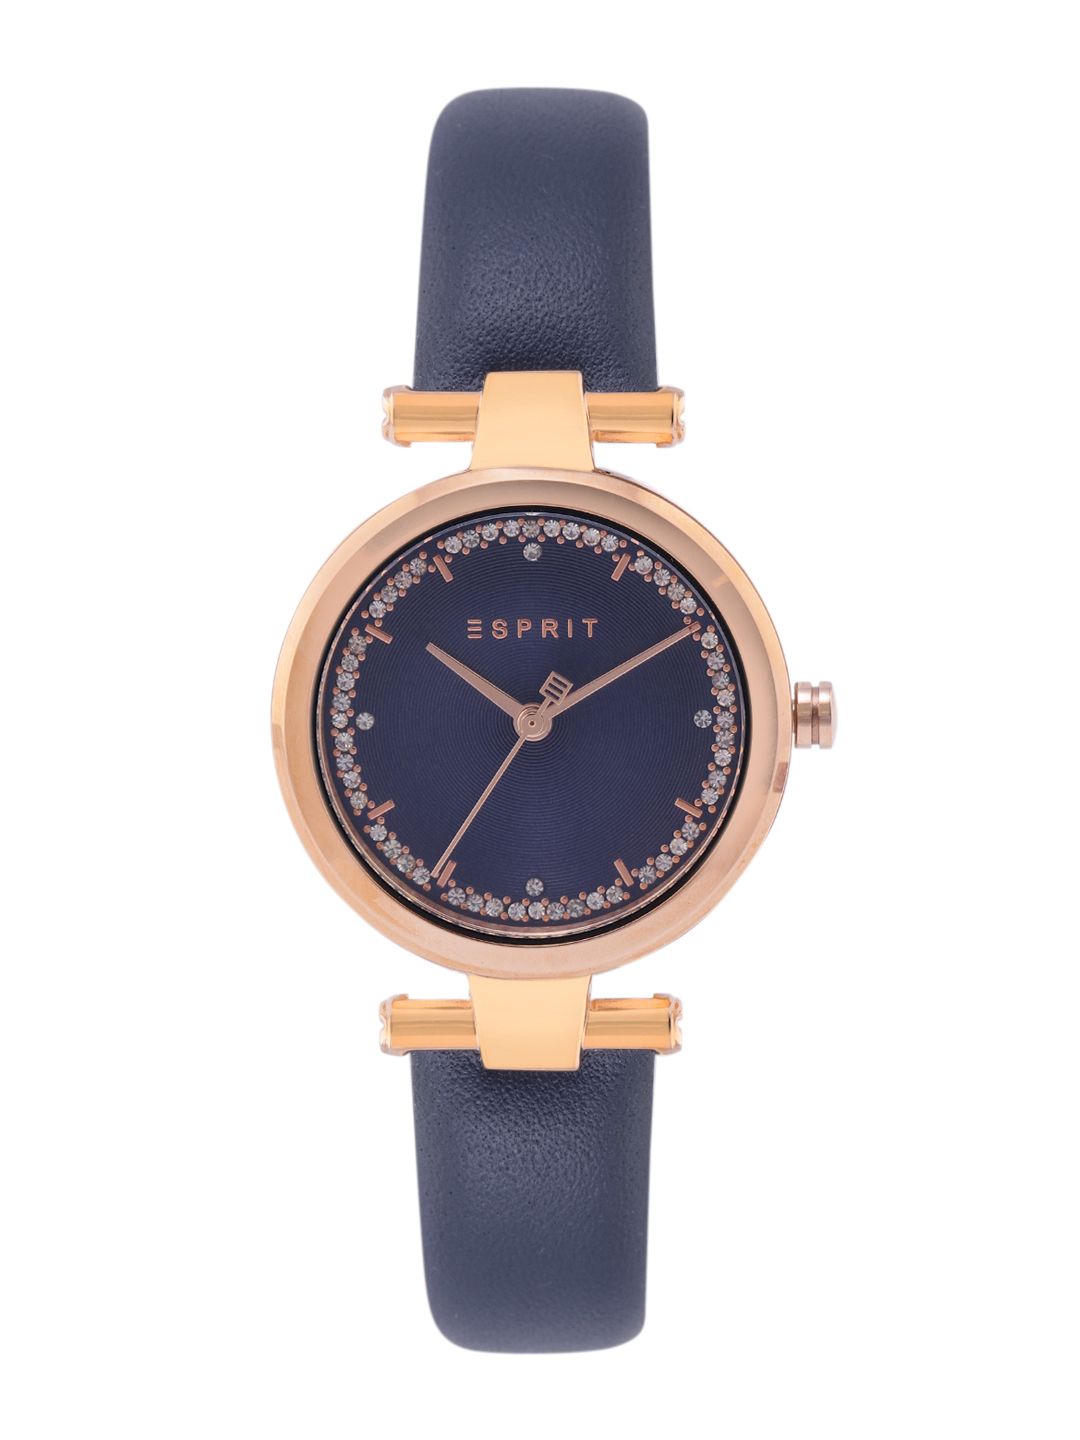 ESPRIT Women Blue Embellished Analogue Watch ES1L203L0055 Price in India